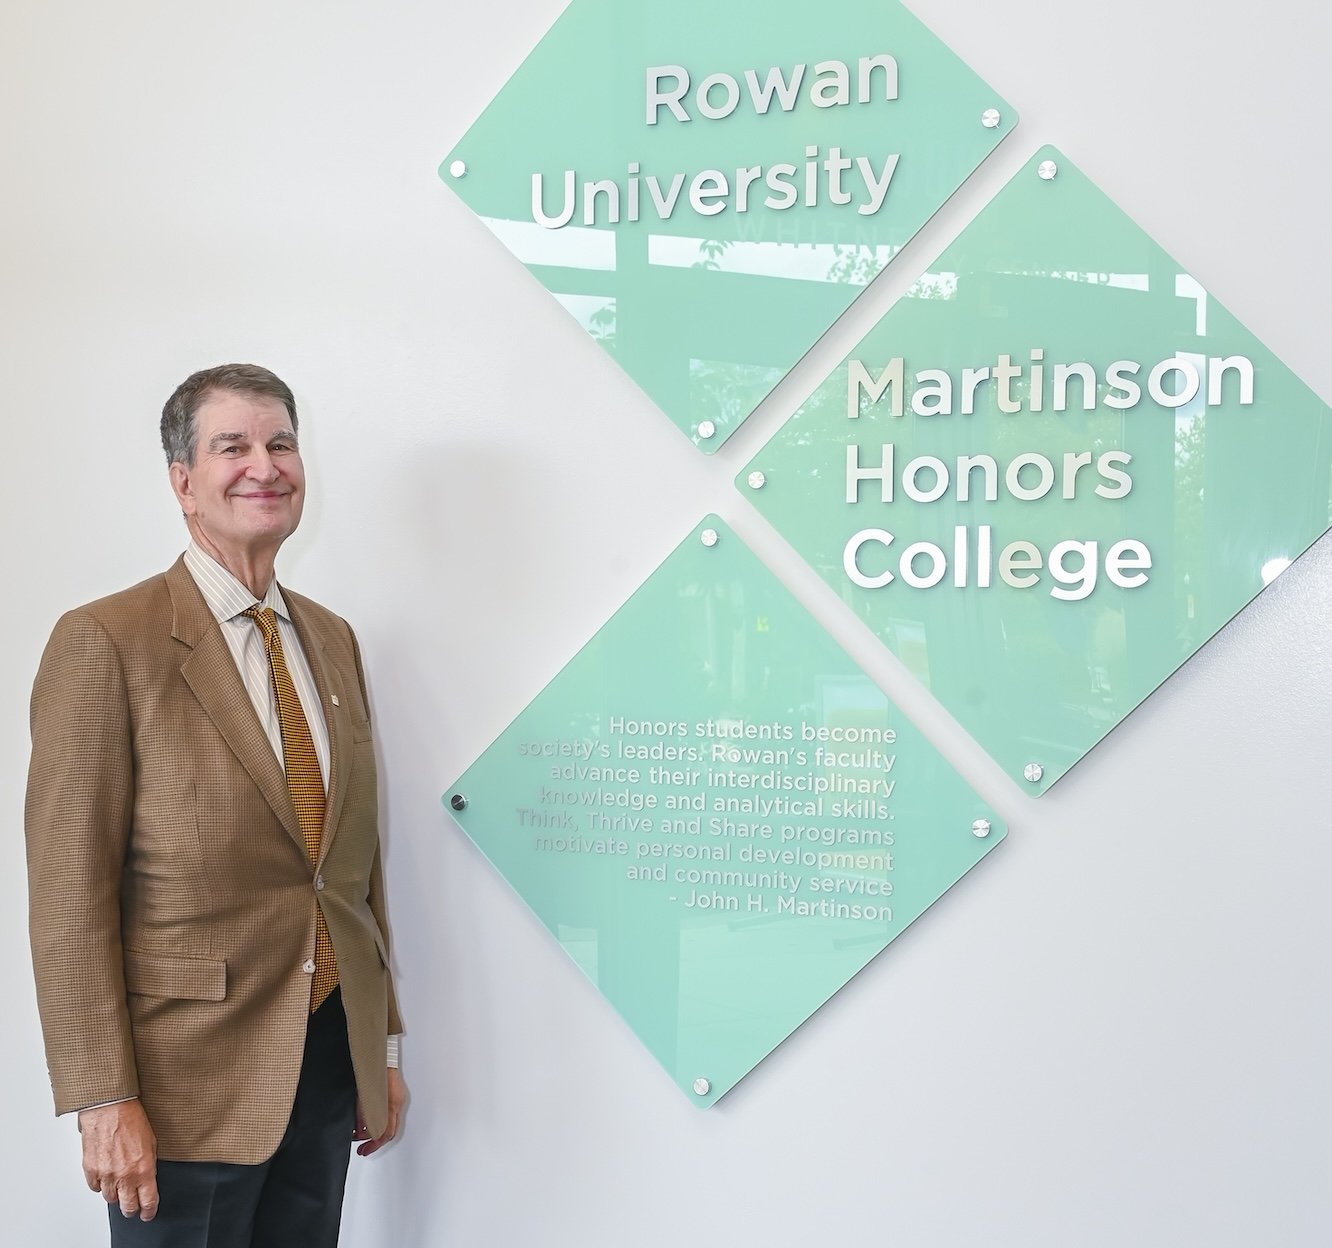 Dr. Martinson standing in front of the Honors College signage.